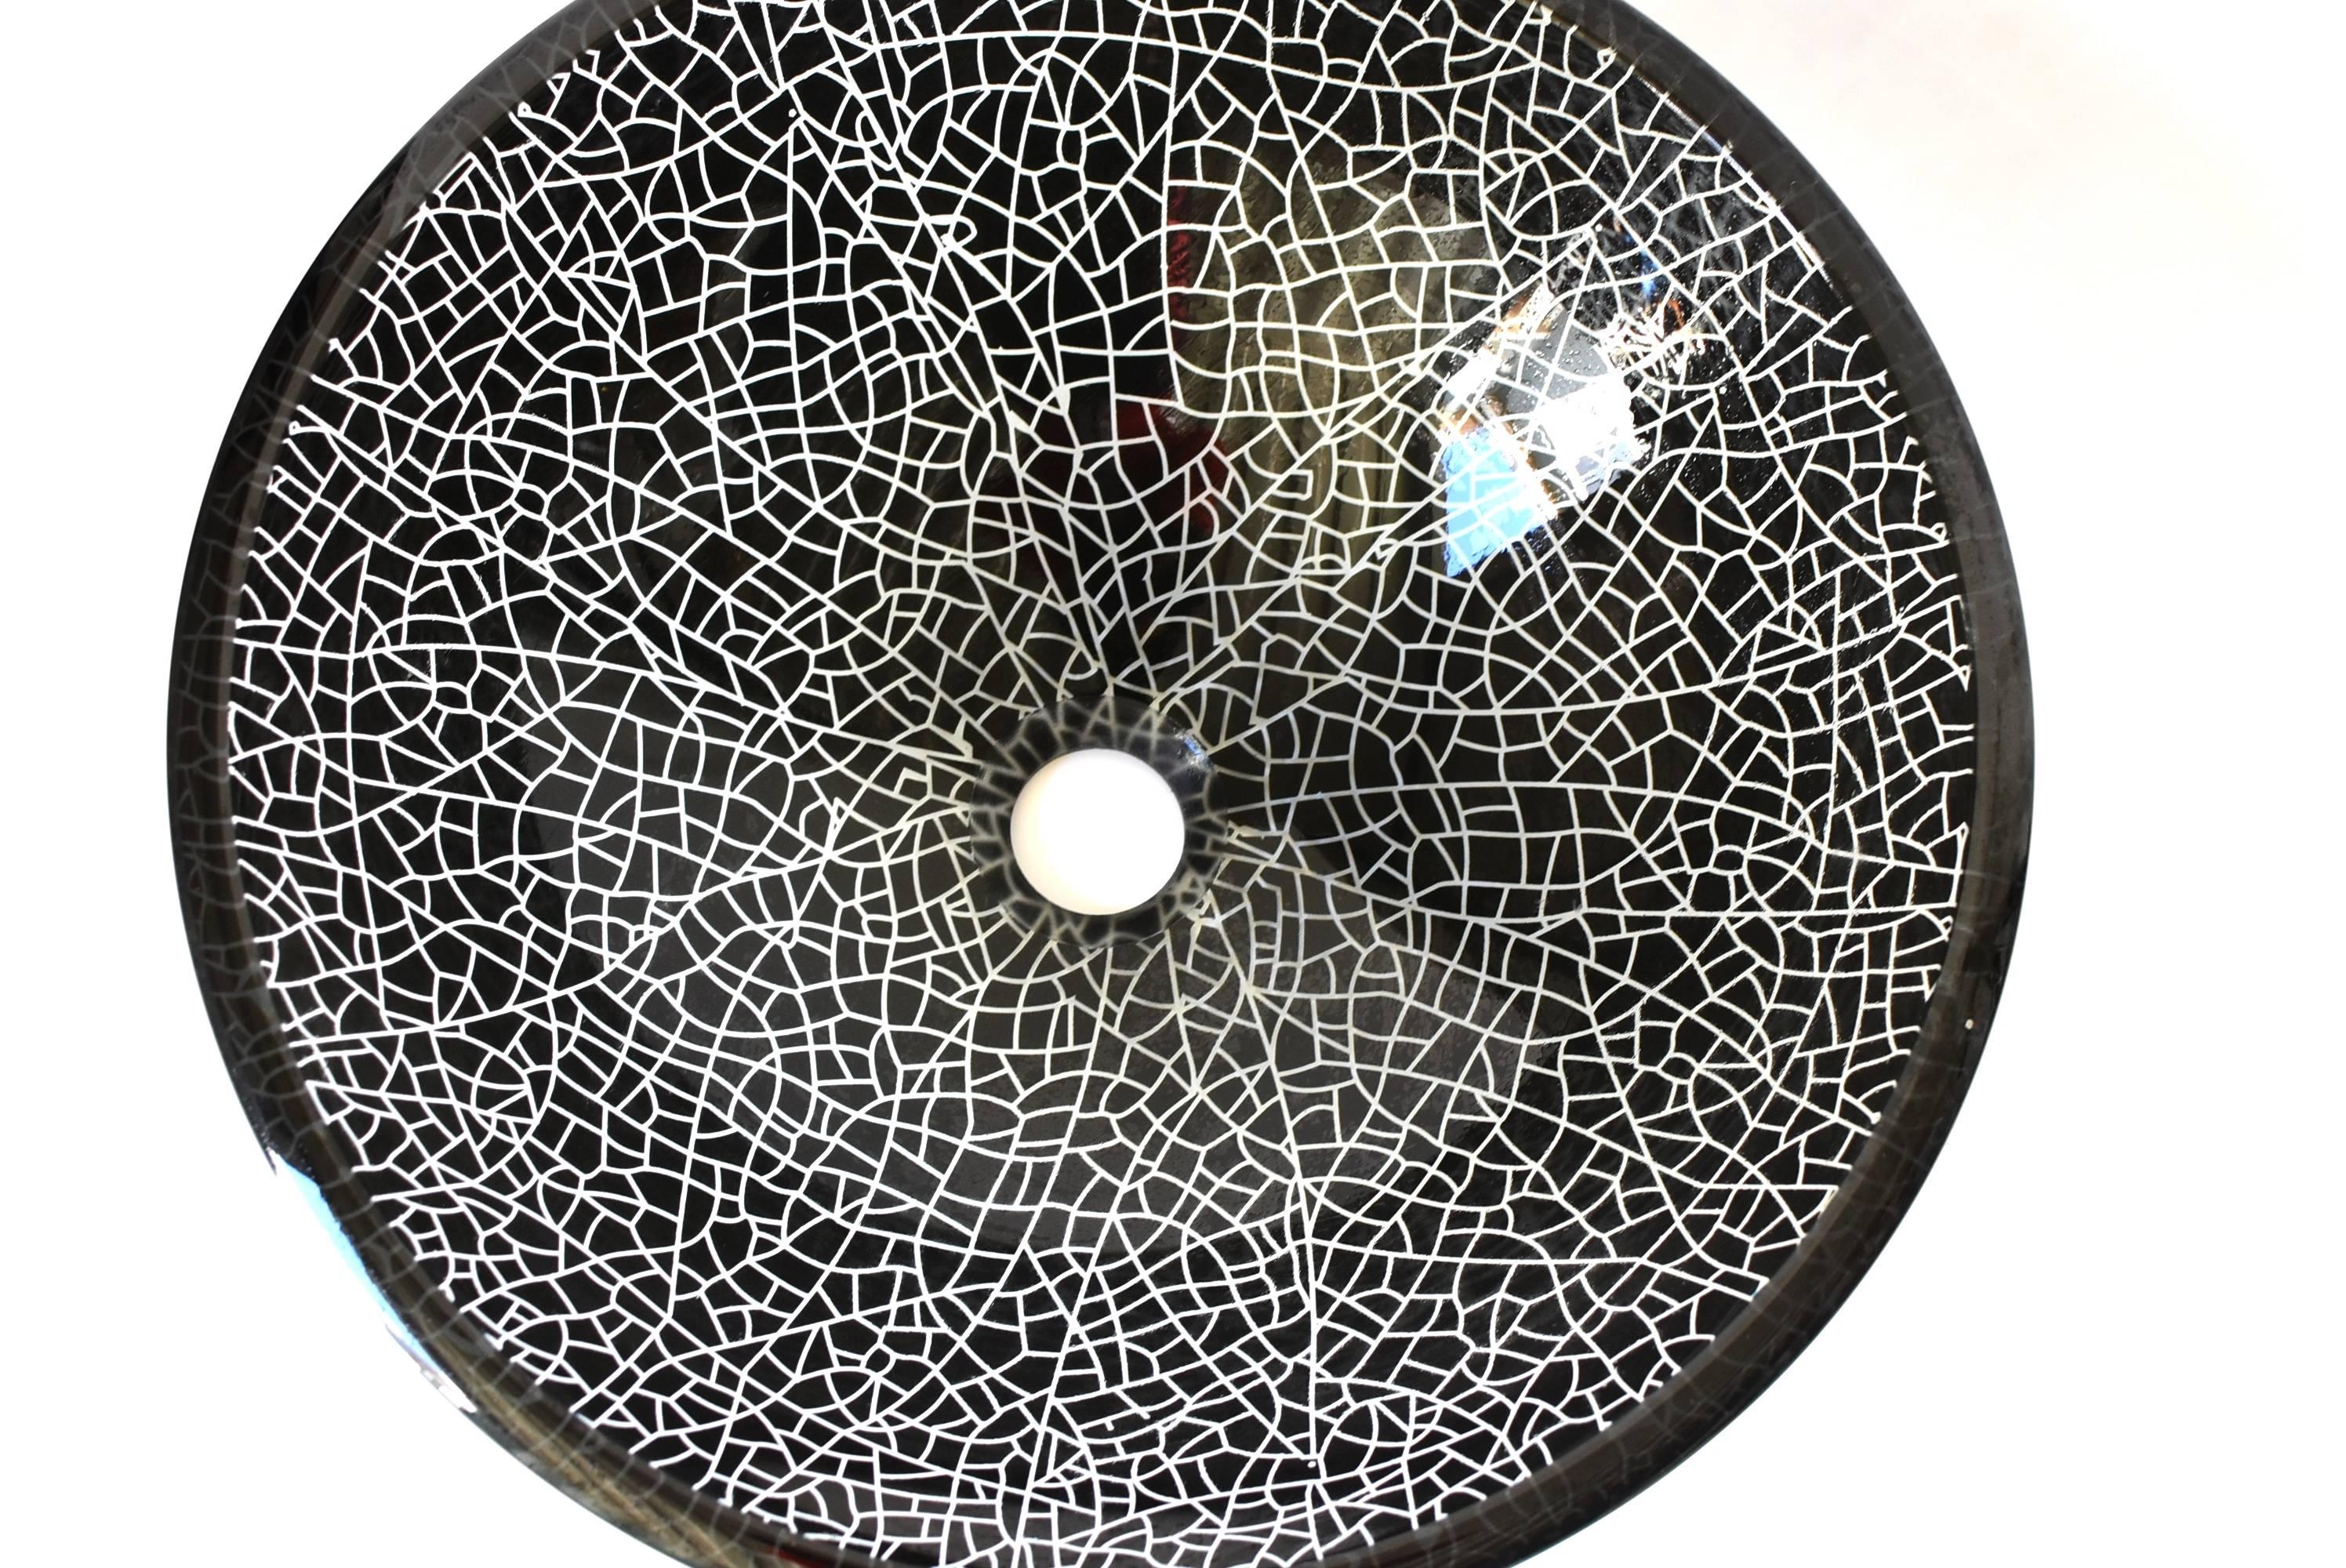 Beautiful black and white glass sink with a crackle pattern. The sink is heavy and substantial, rings like crystal. The crackle pattern adds a modern touch to the piece. The bowl is glass, wider, lower height provides extra comfort. One of a kind.